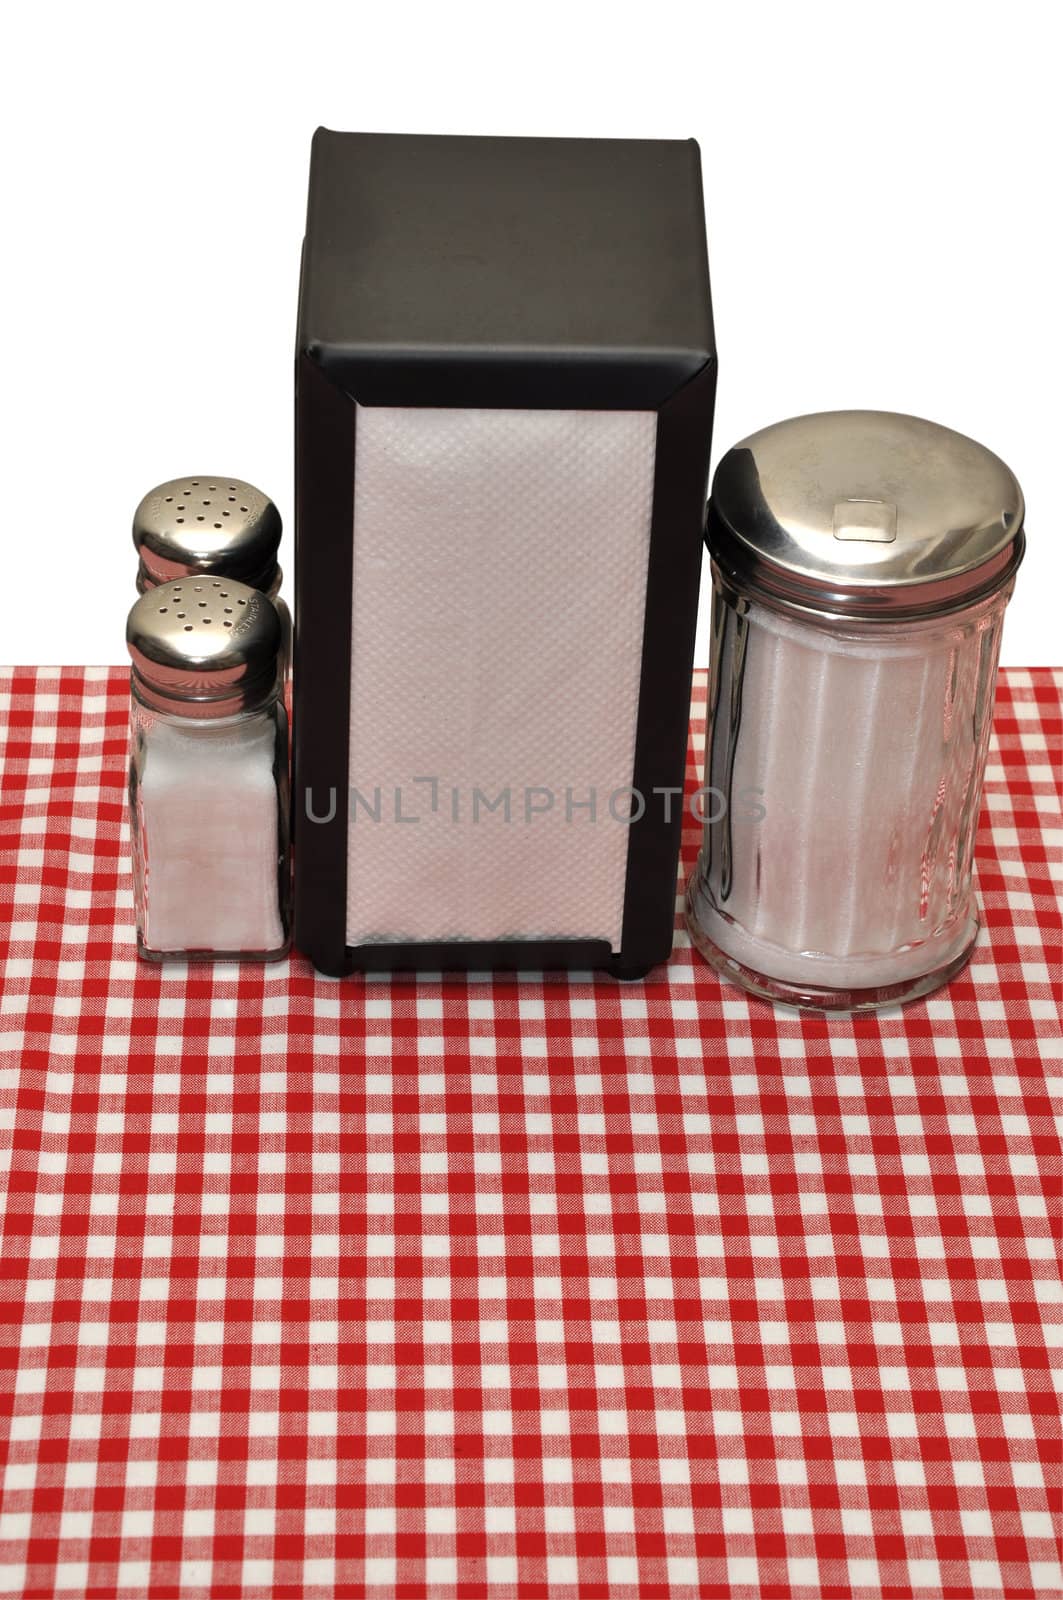 Table with red gingham tablecloth at diner.  Isolated on white background with clipping path.